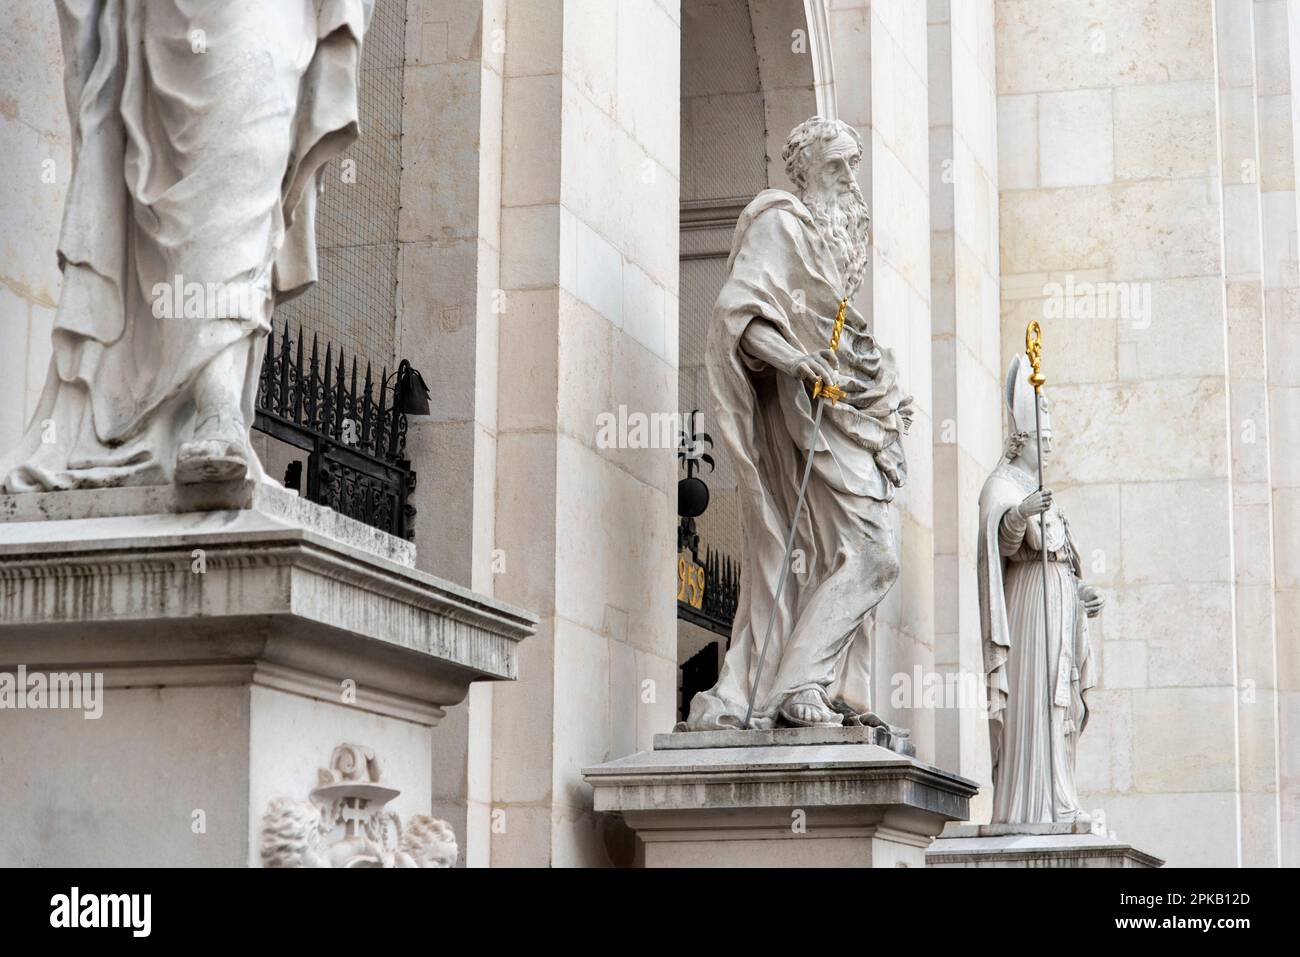 Marble Sculpture of Saints at the Main Entrance of the Salzburg Cathedral, Austria Stock Photo